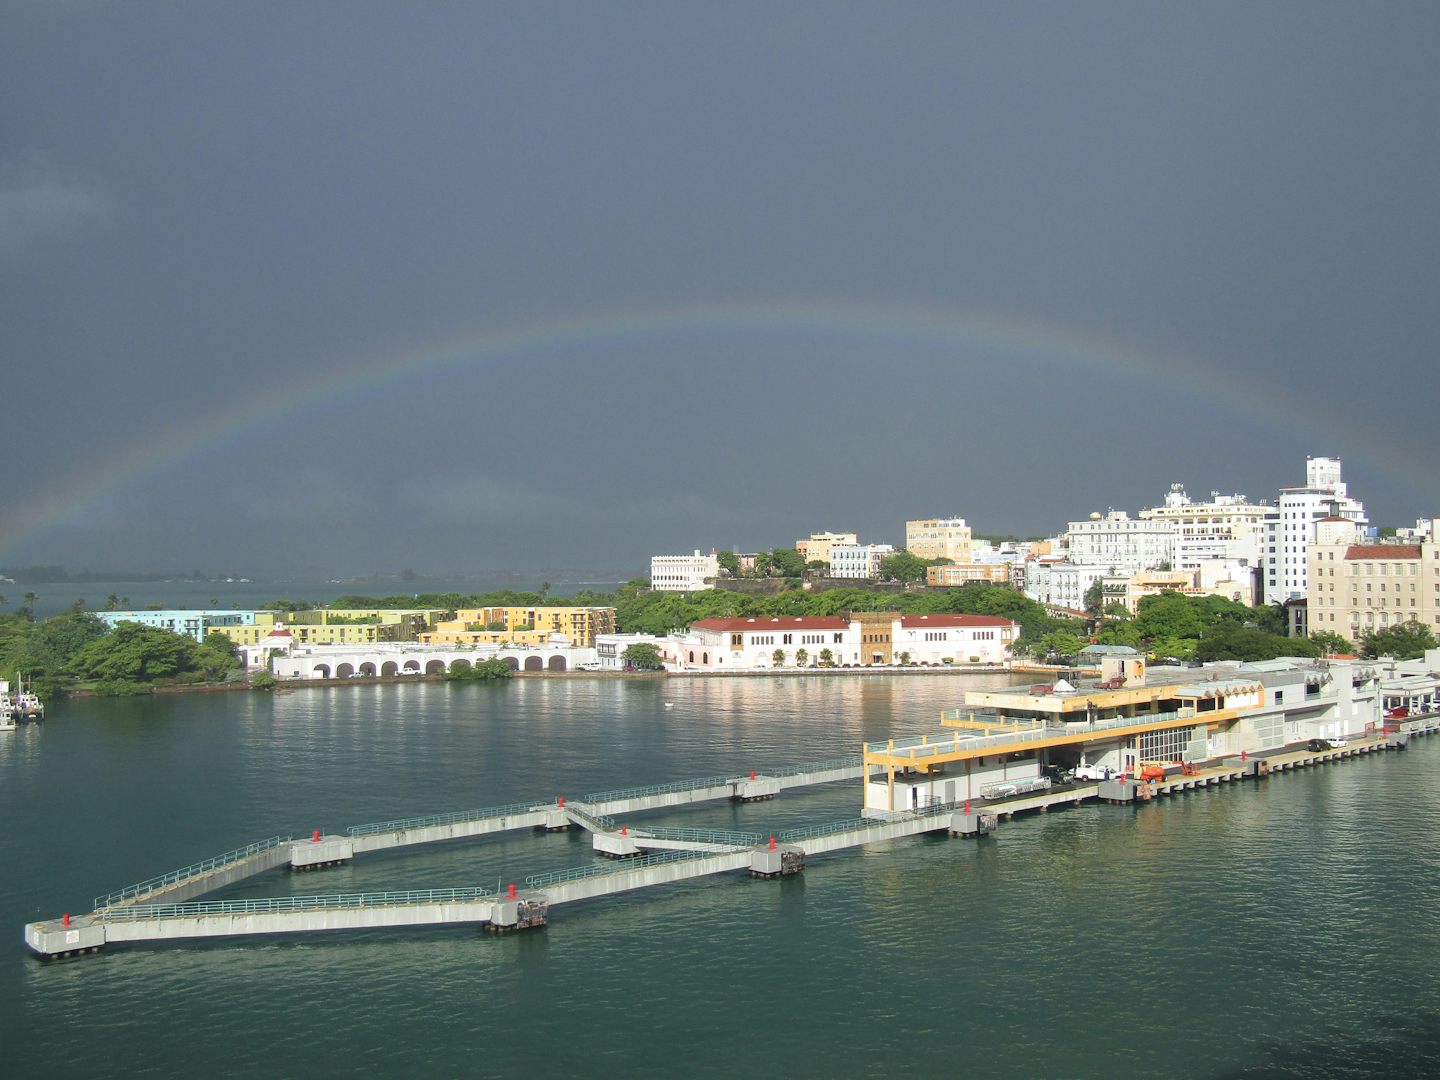 What a sight this was. The morning we arrived in Old San Juan, Puerto Rico, the weather could not make up it